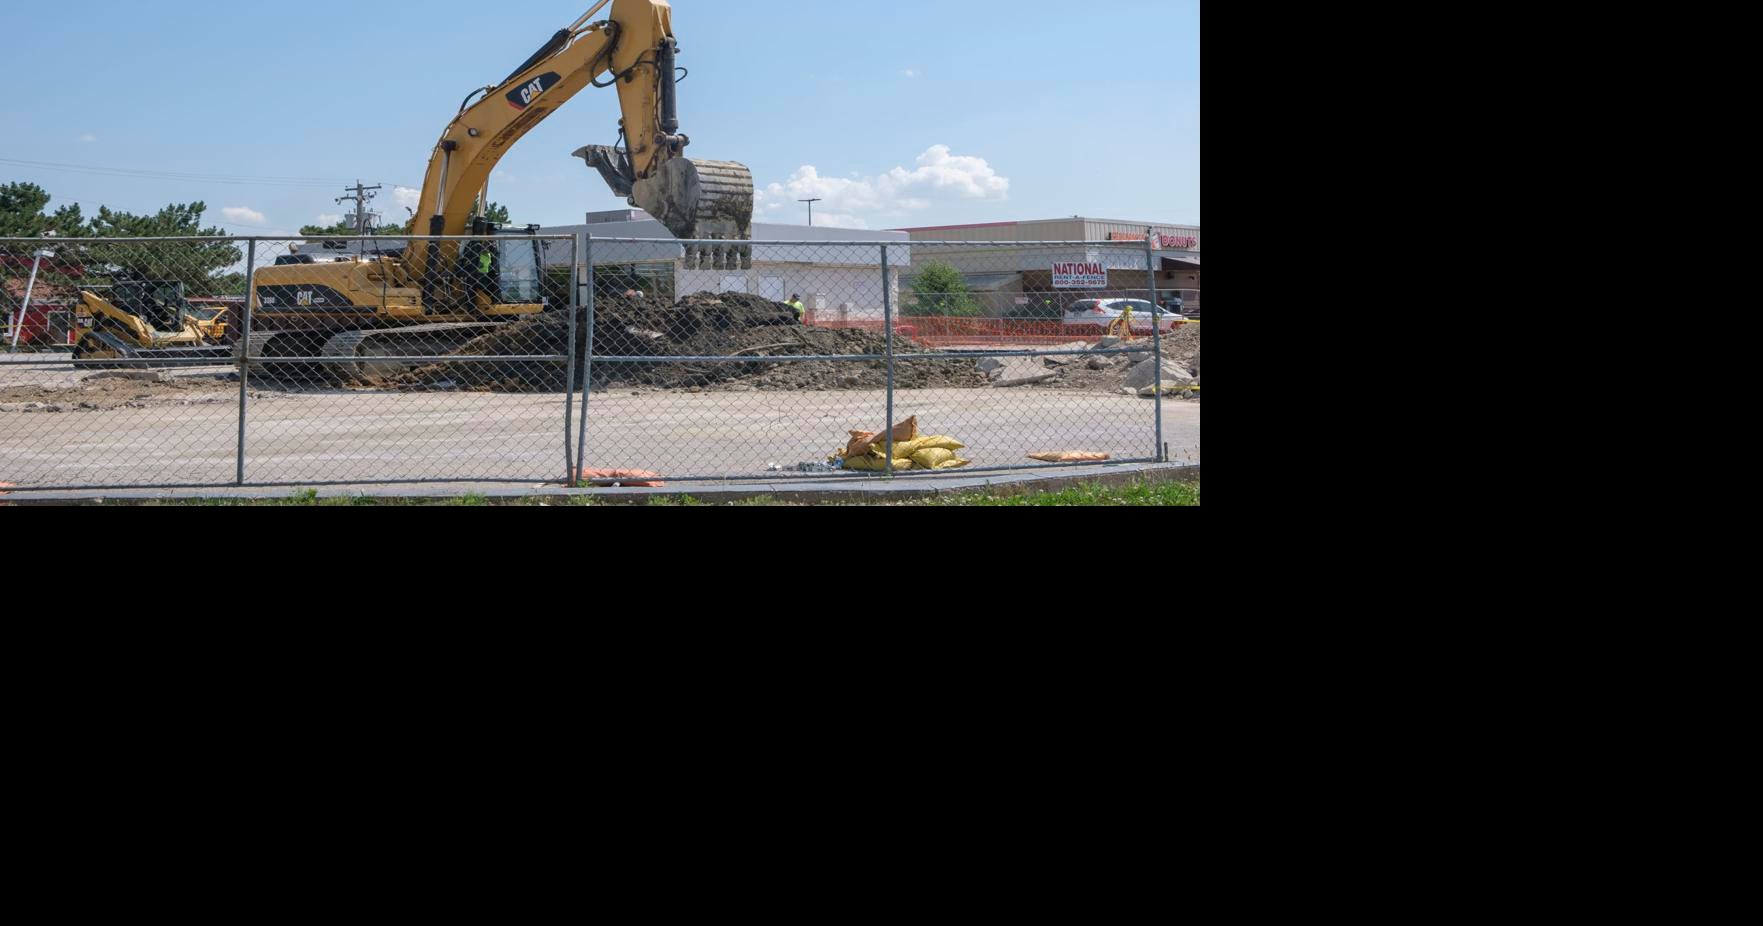 Construction on TJ Maxx inside Hickory Point Mall begins